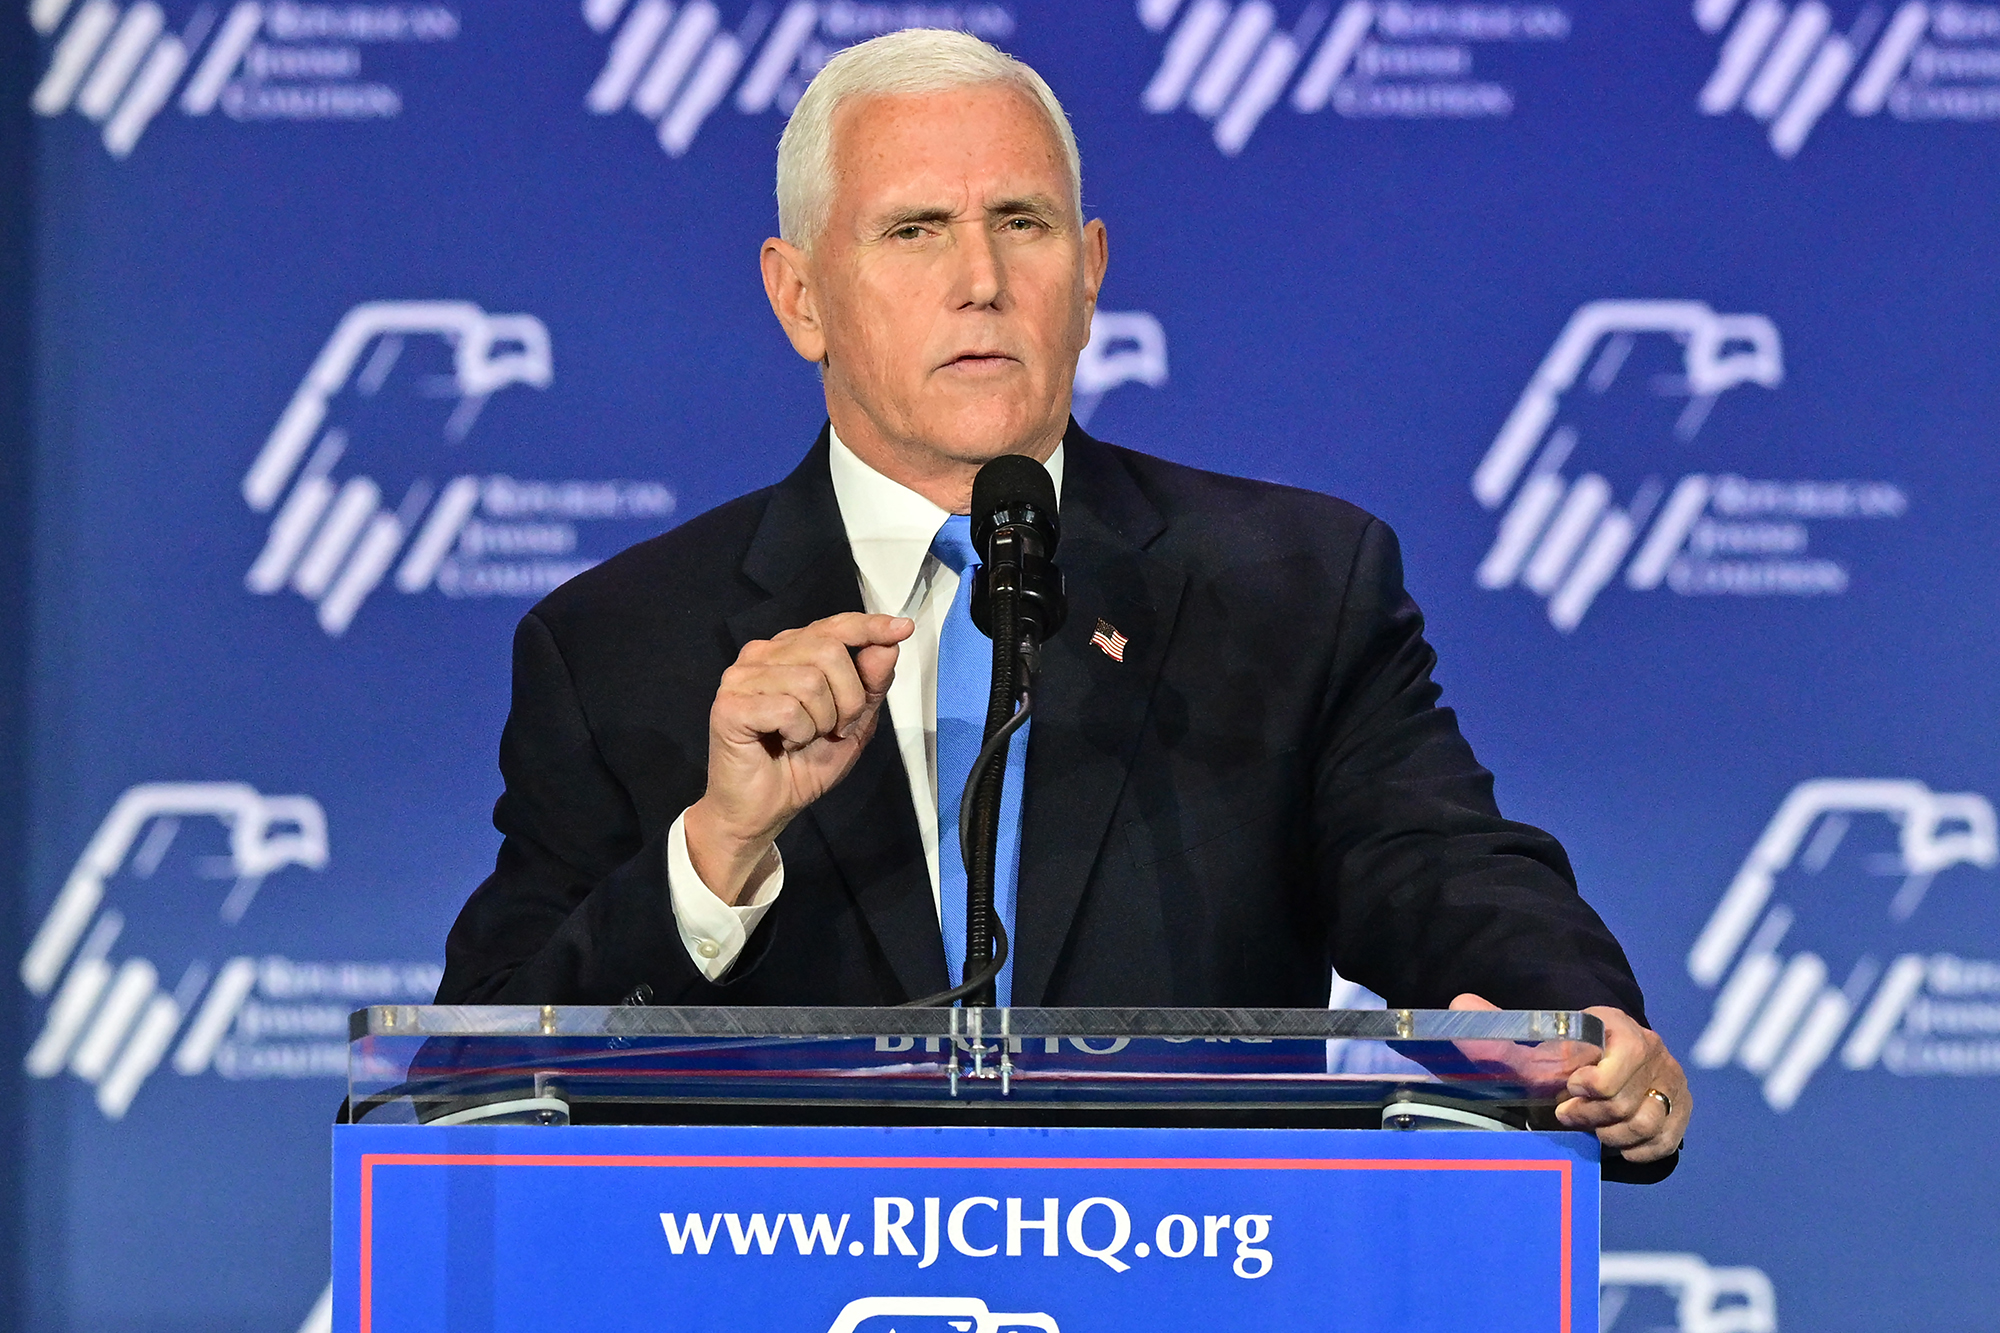 Mike Pence bei seiner Rede im Venetian Conference Center in Las Vegas (Bild: Frederic J. Brown/AFP)